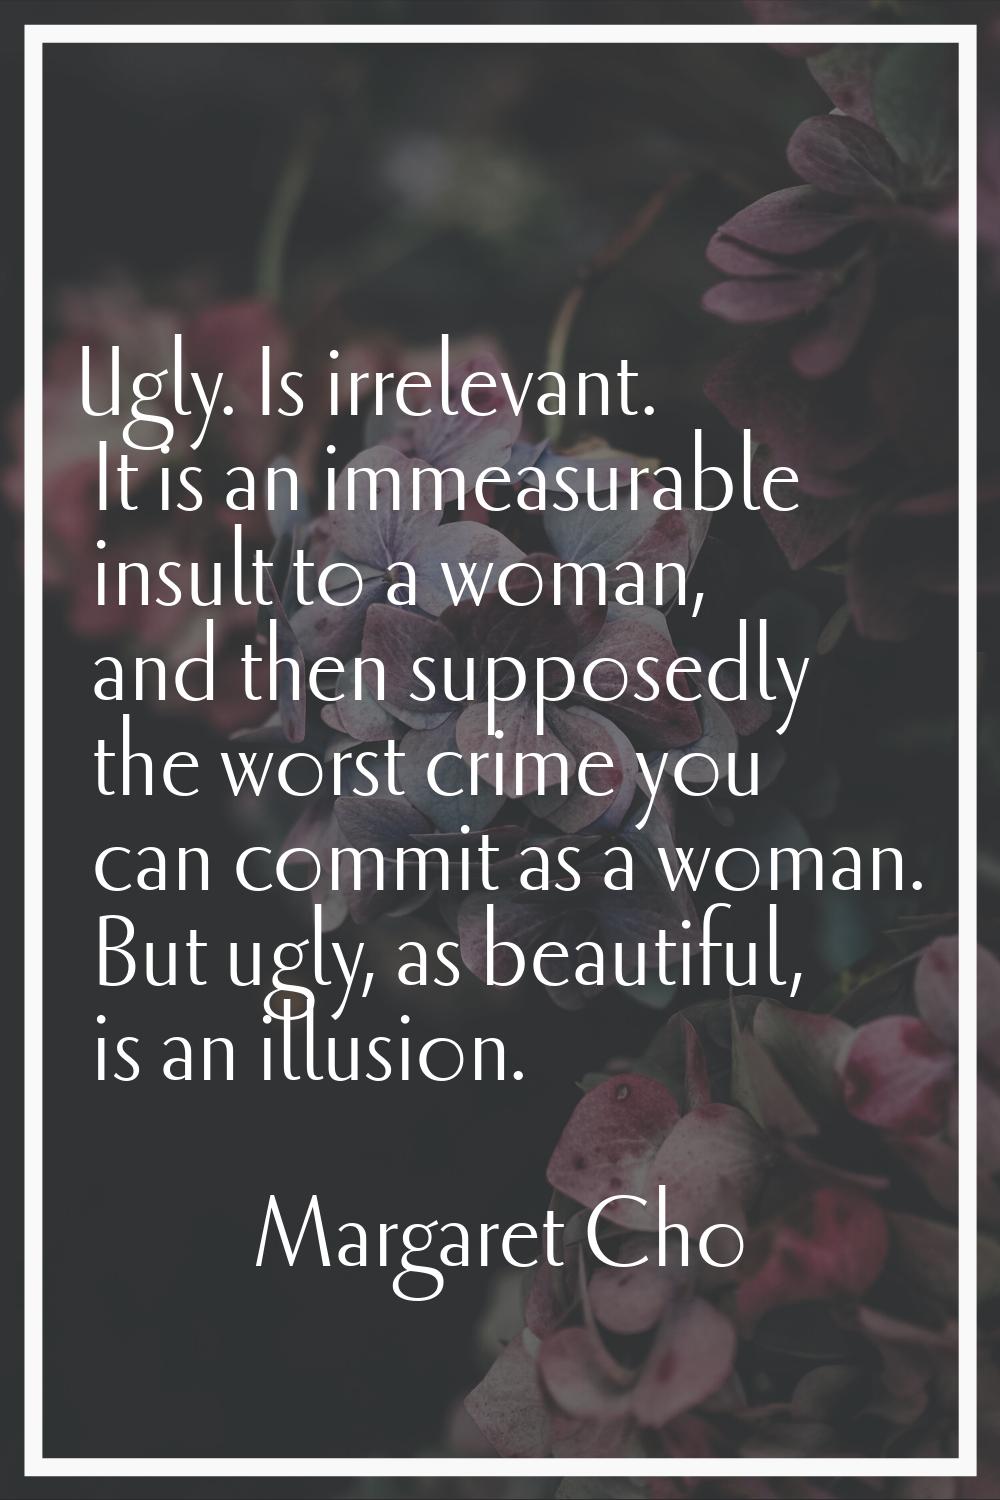 Ugly. Is irrelevant. It is an immeasurable insult to a woman, and then supposedly the worst crime y